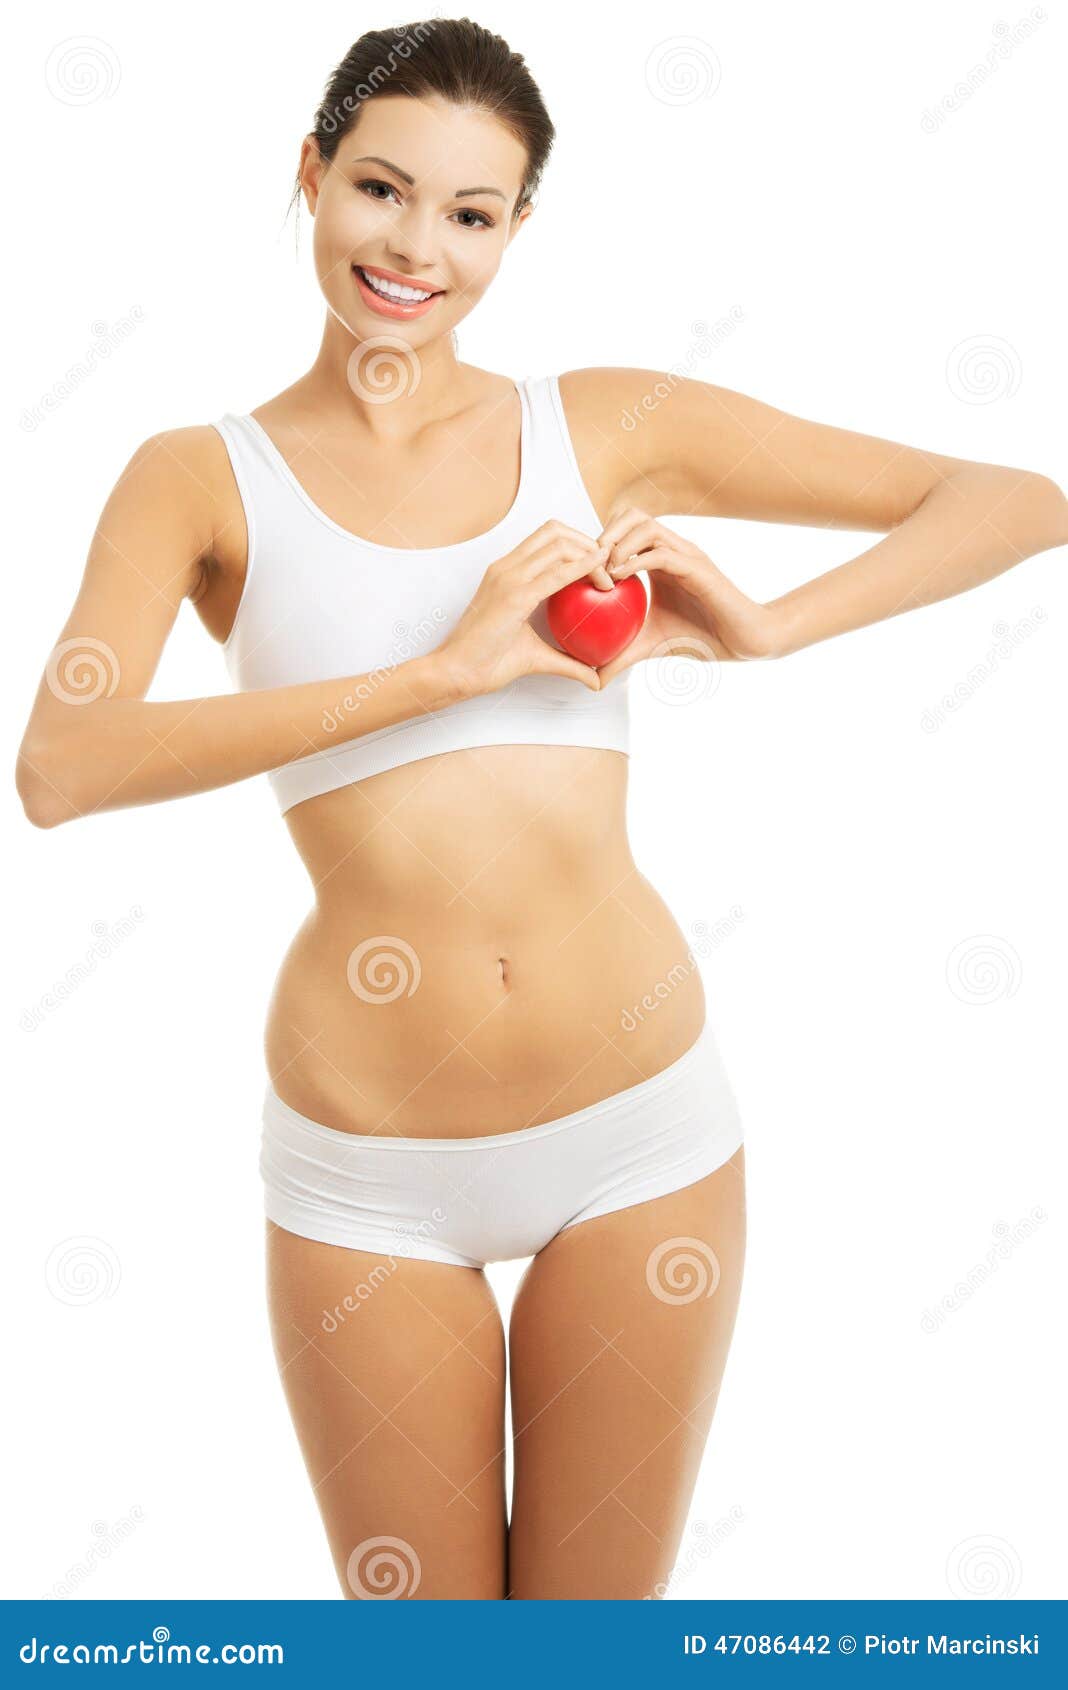 Women in underwear stock image. Image of care, holding - 87862553